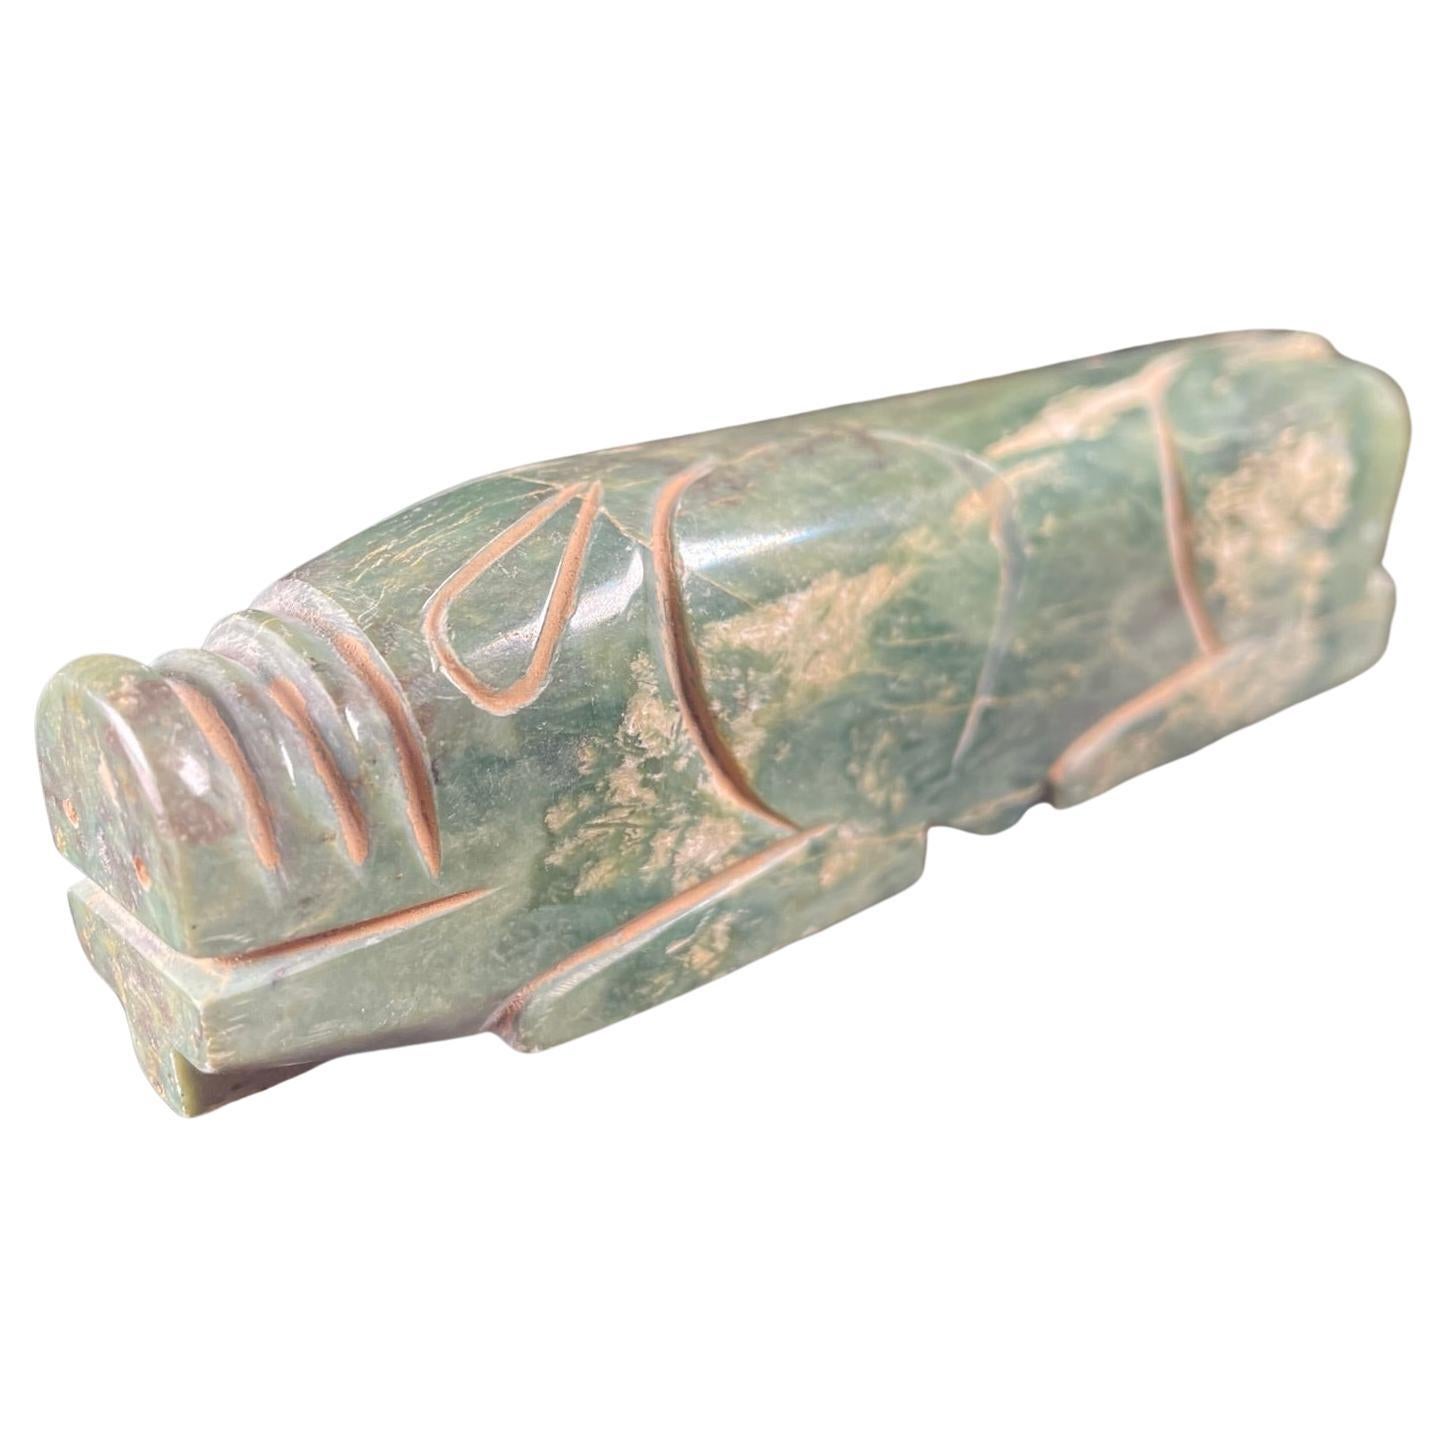 China Large Jade Pendant Pig with Deep Green Colors For Sale